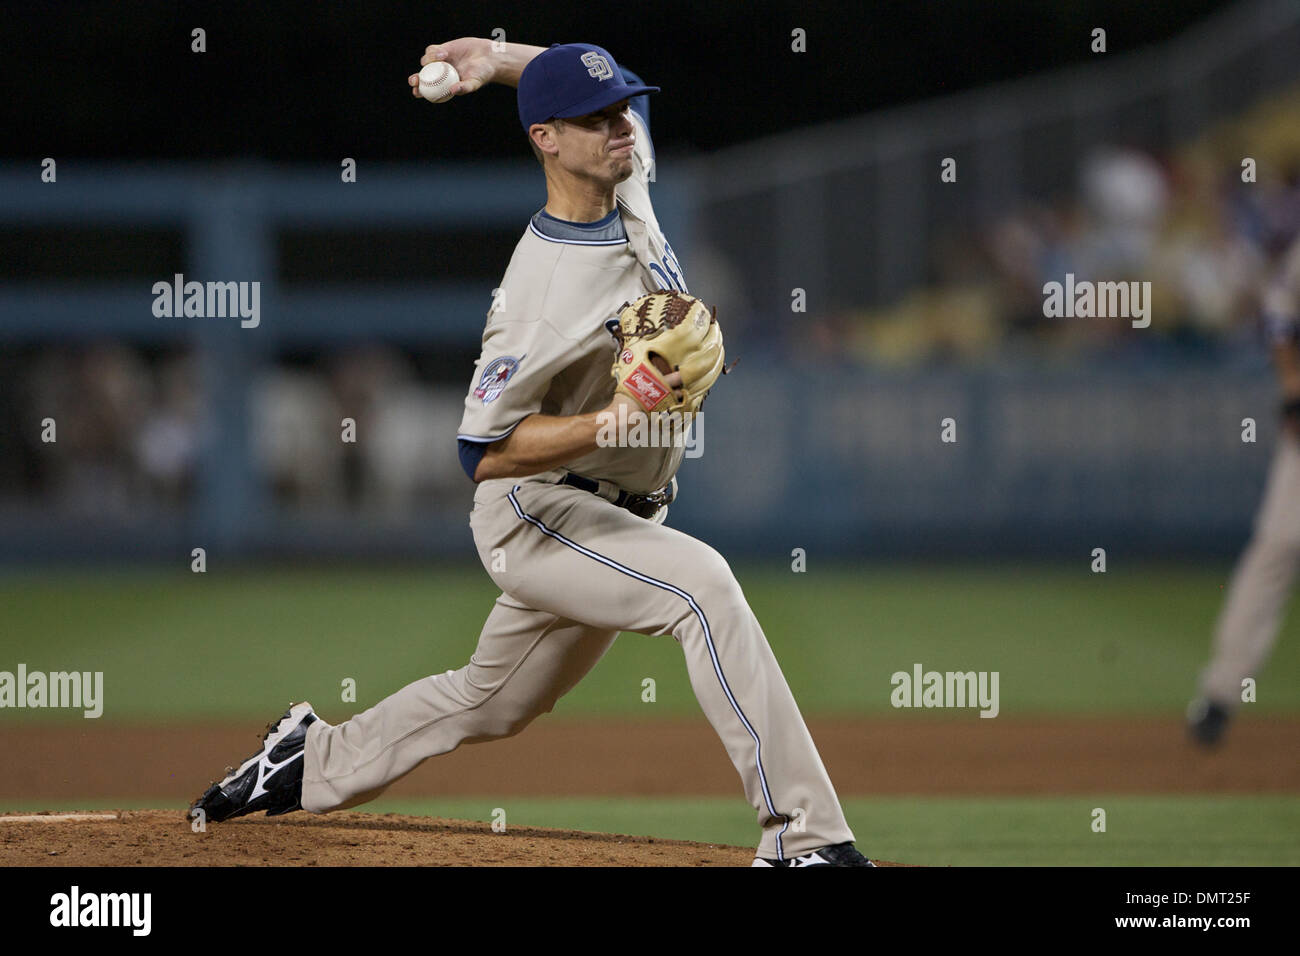 Game action between the San Diego Padres and Los Angeles Dodgers at Dodger Stadium.  Wade LeBlanc makes a pitch against the Dodgers in the bottom of the third inning. (Credit Image: © Tony Leon/Southcreek Global/ZUMApress.com) Stock Photo